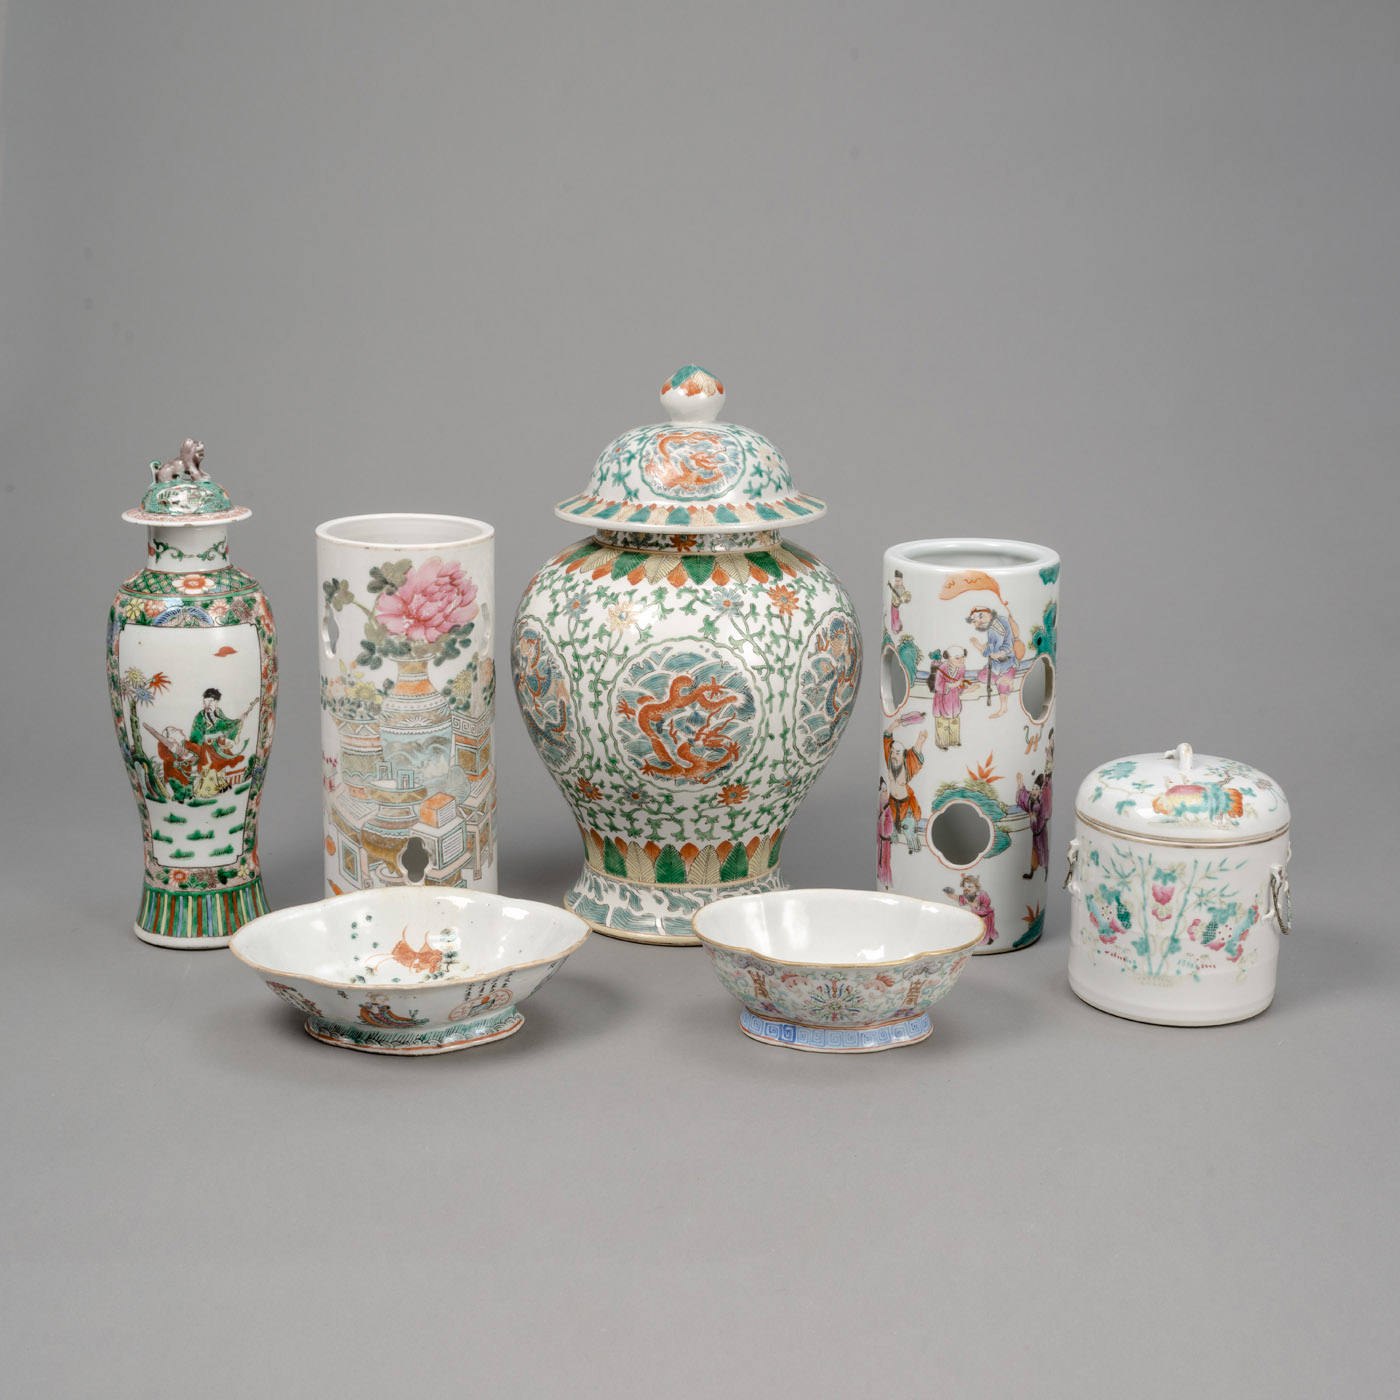 <b>TWO 'FAMILLE ROSE' PORCELAIN HAT STANDS, TWO VASES AND COVERS, A LIDDED BOX, AND TWO STEM TRAYS, E.G. 'WU SHUANG PU'</b>